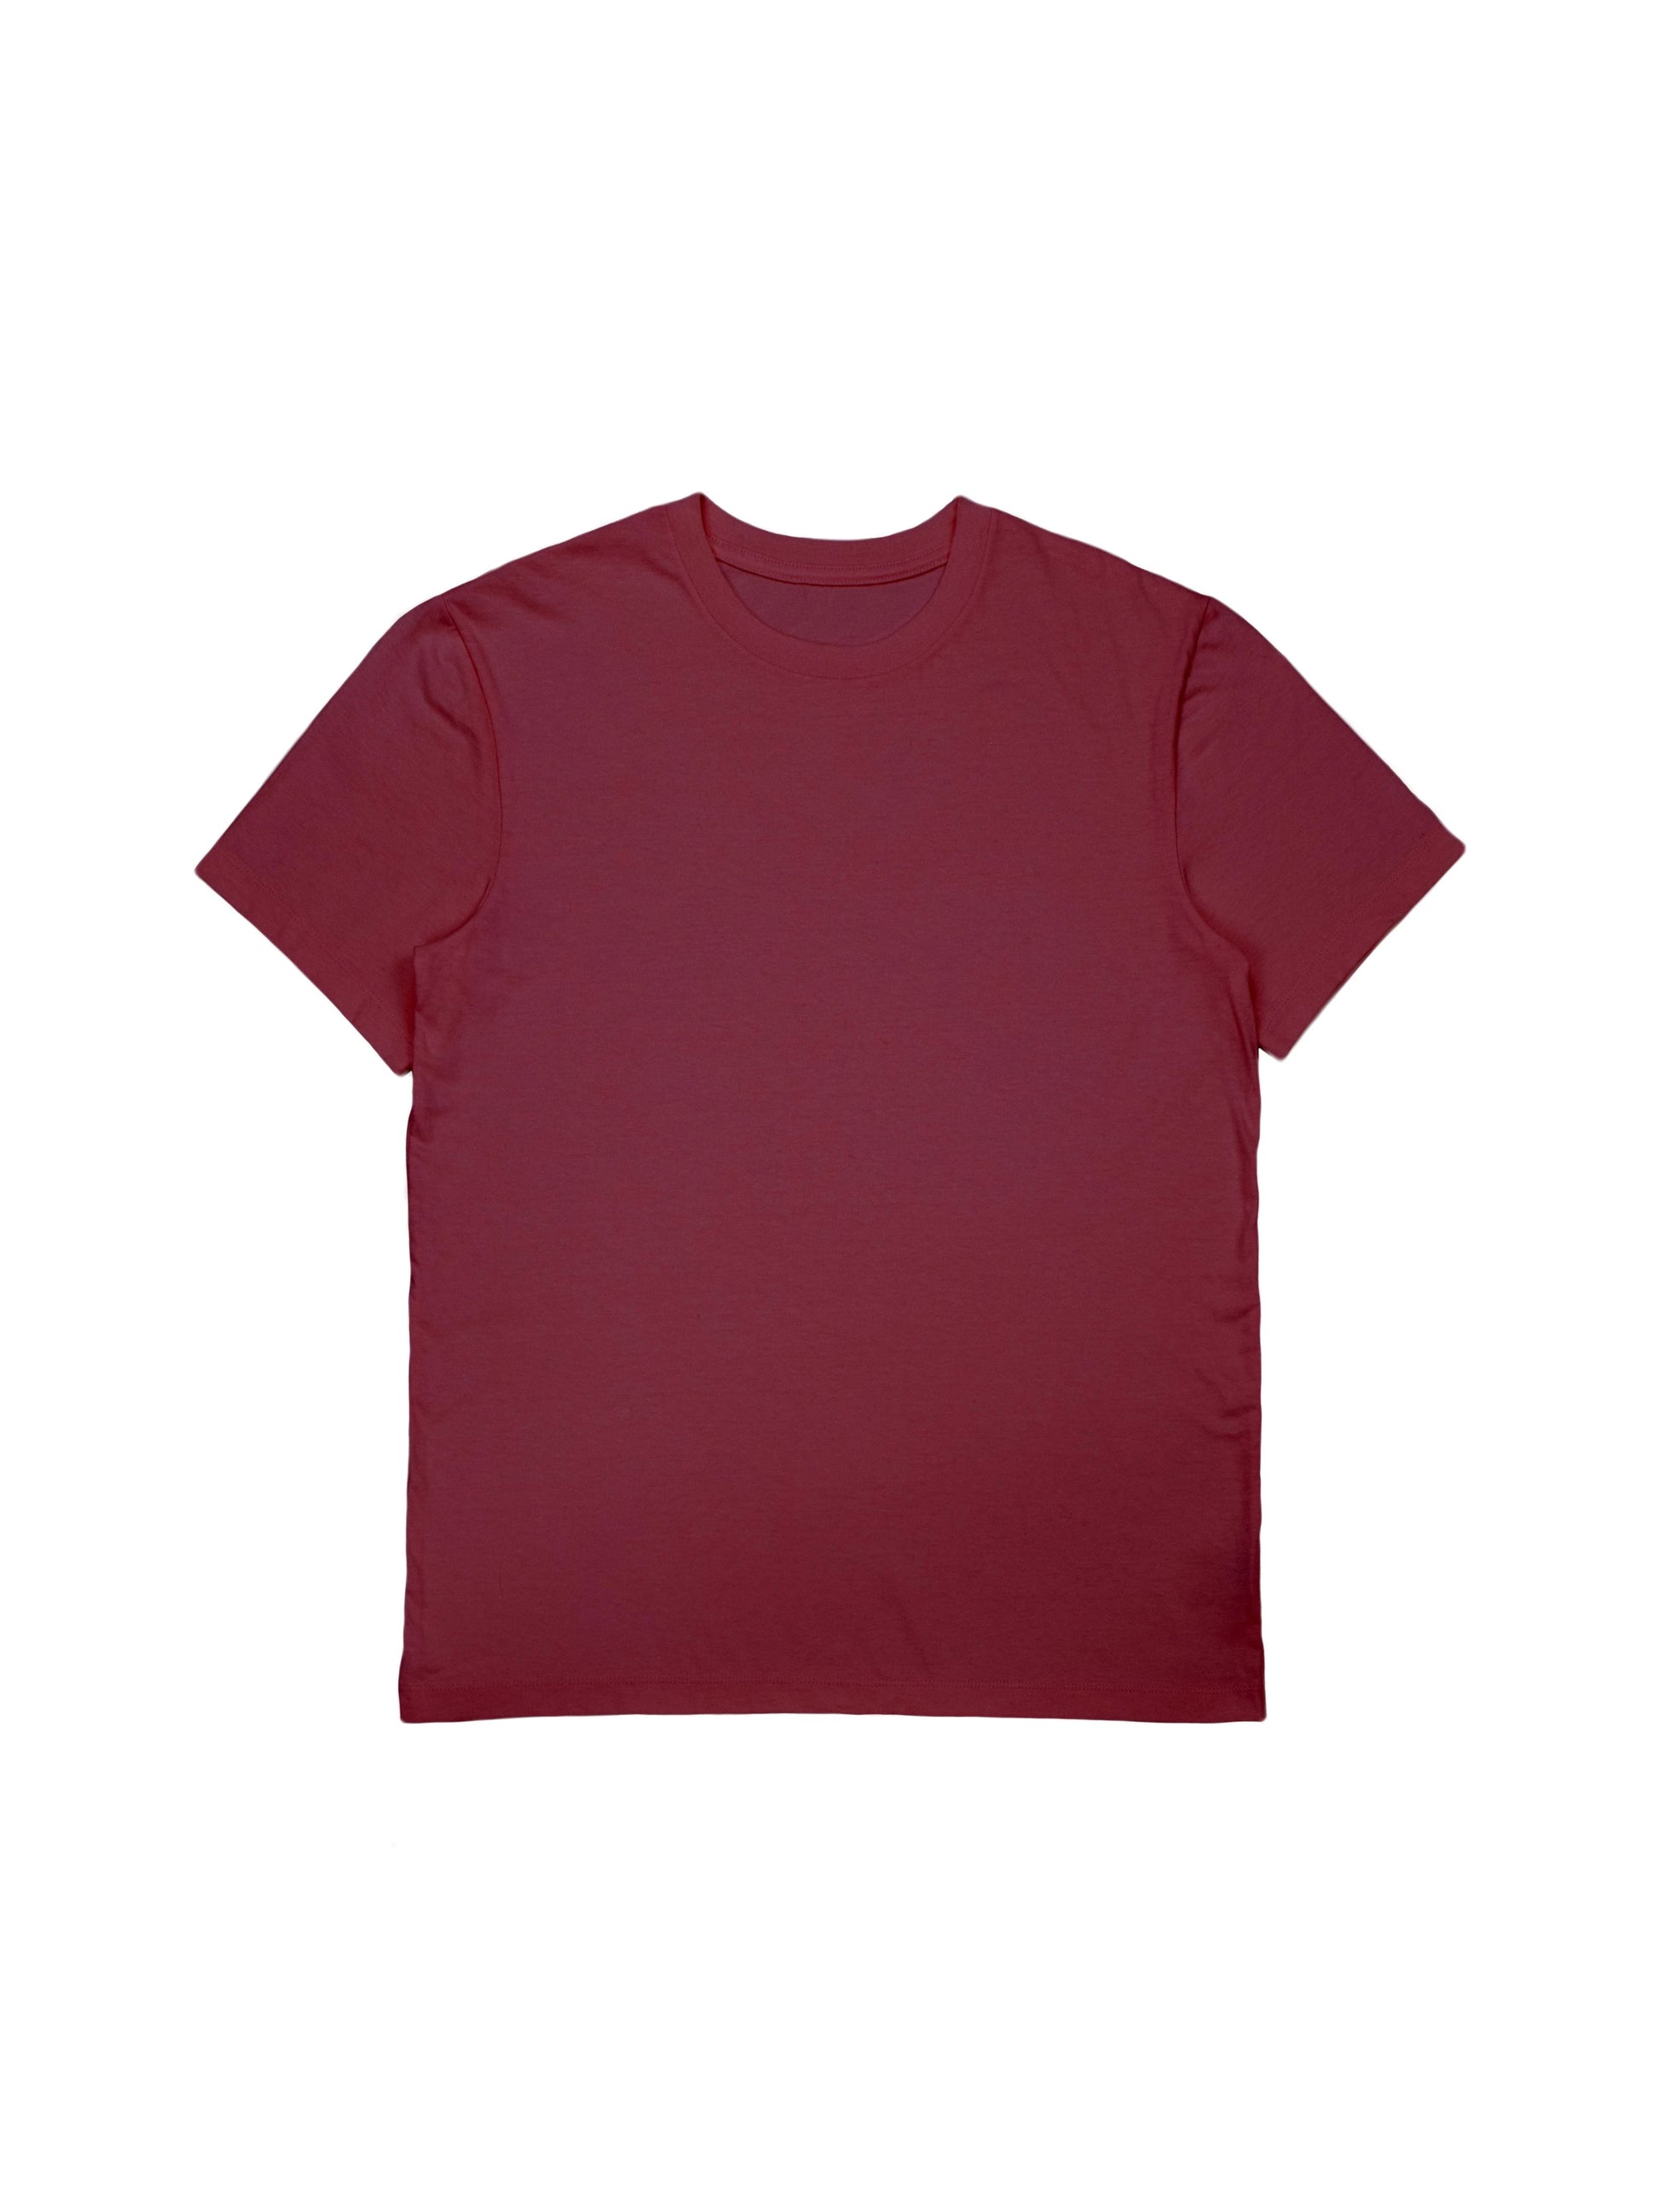 Burgundy T-Shirt in Trendy Boxy Fit.